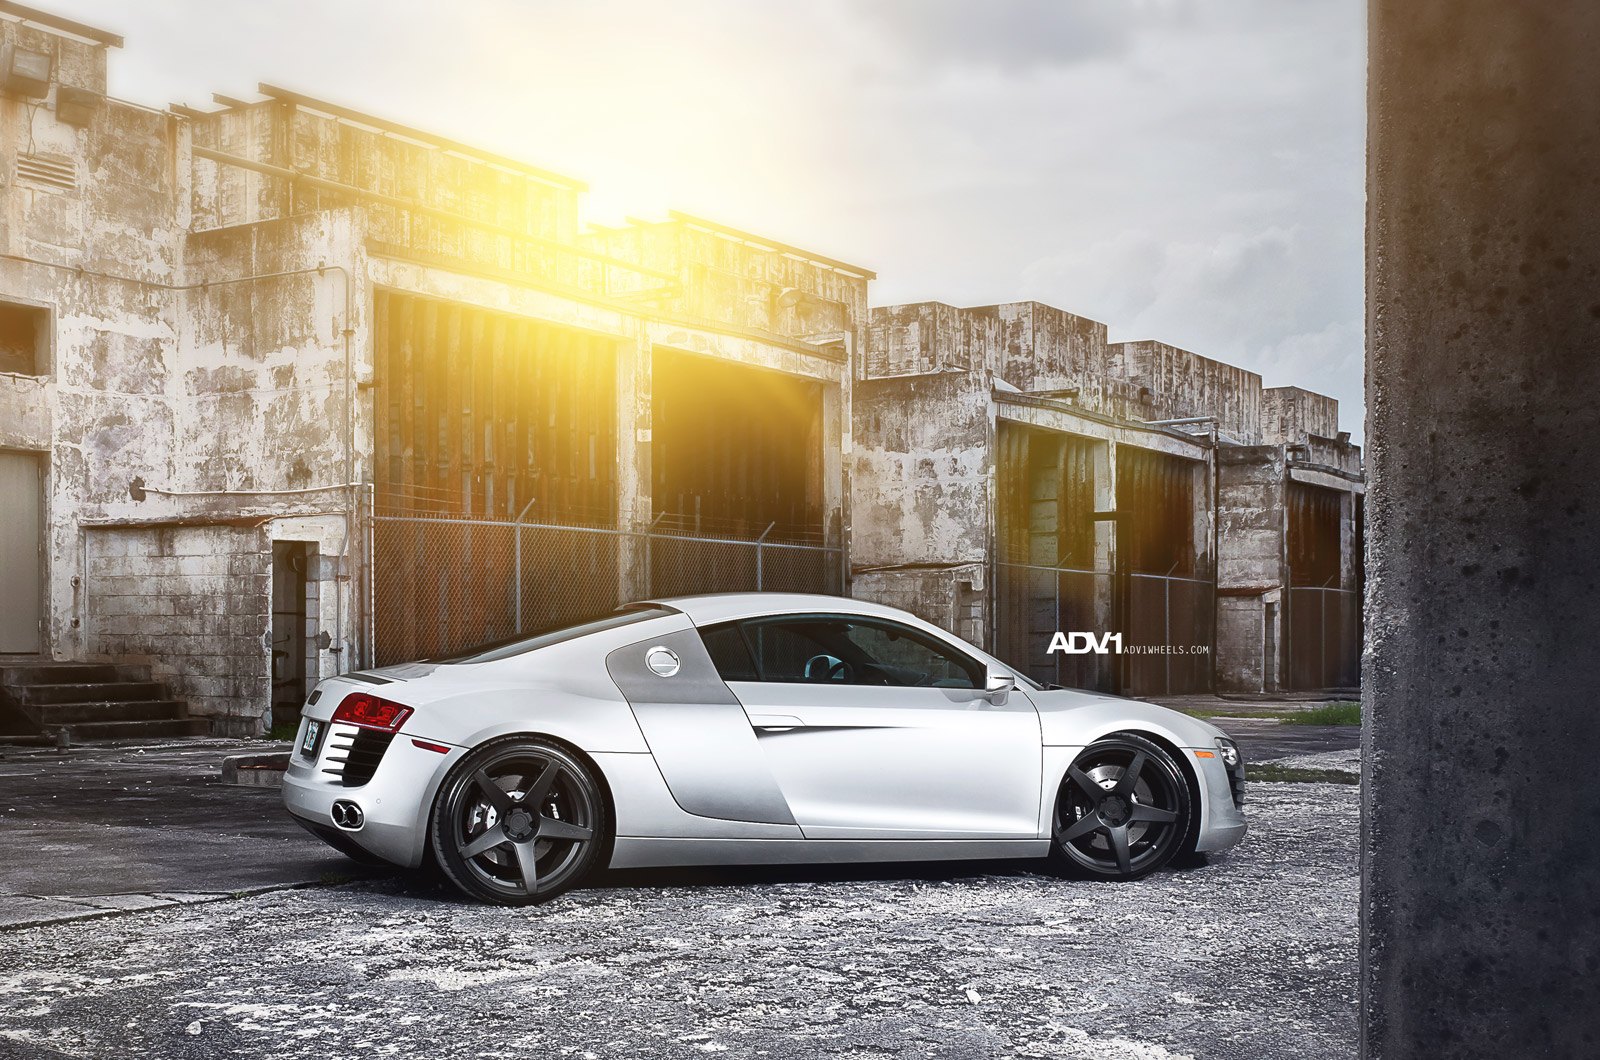 Custom Side Scoops on Silver Audi R8 - Photo by ADV.1